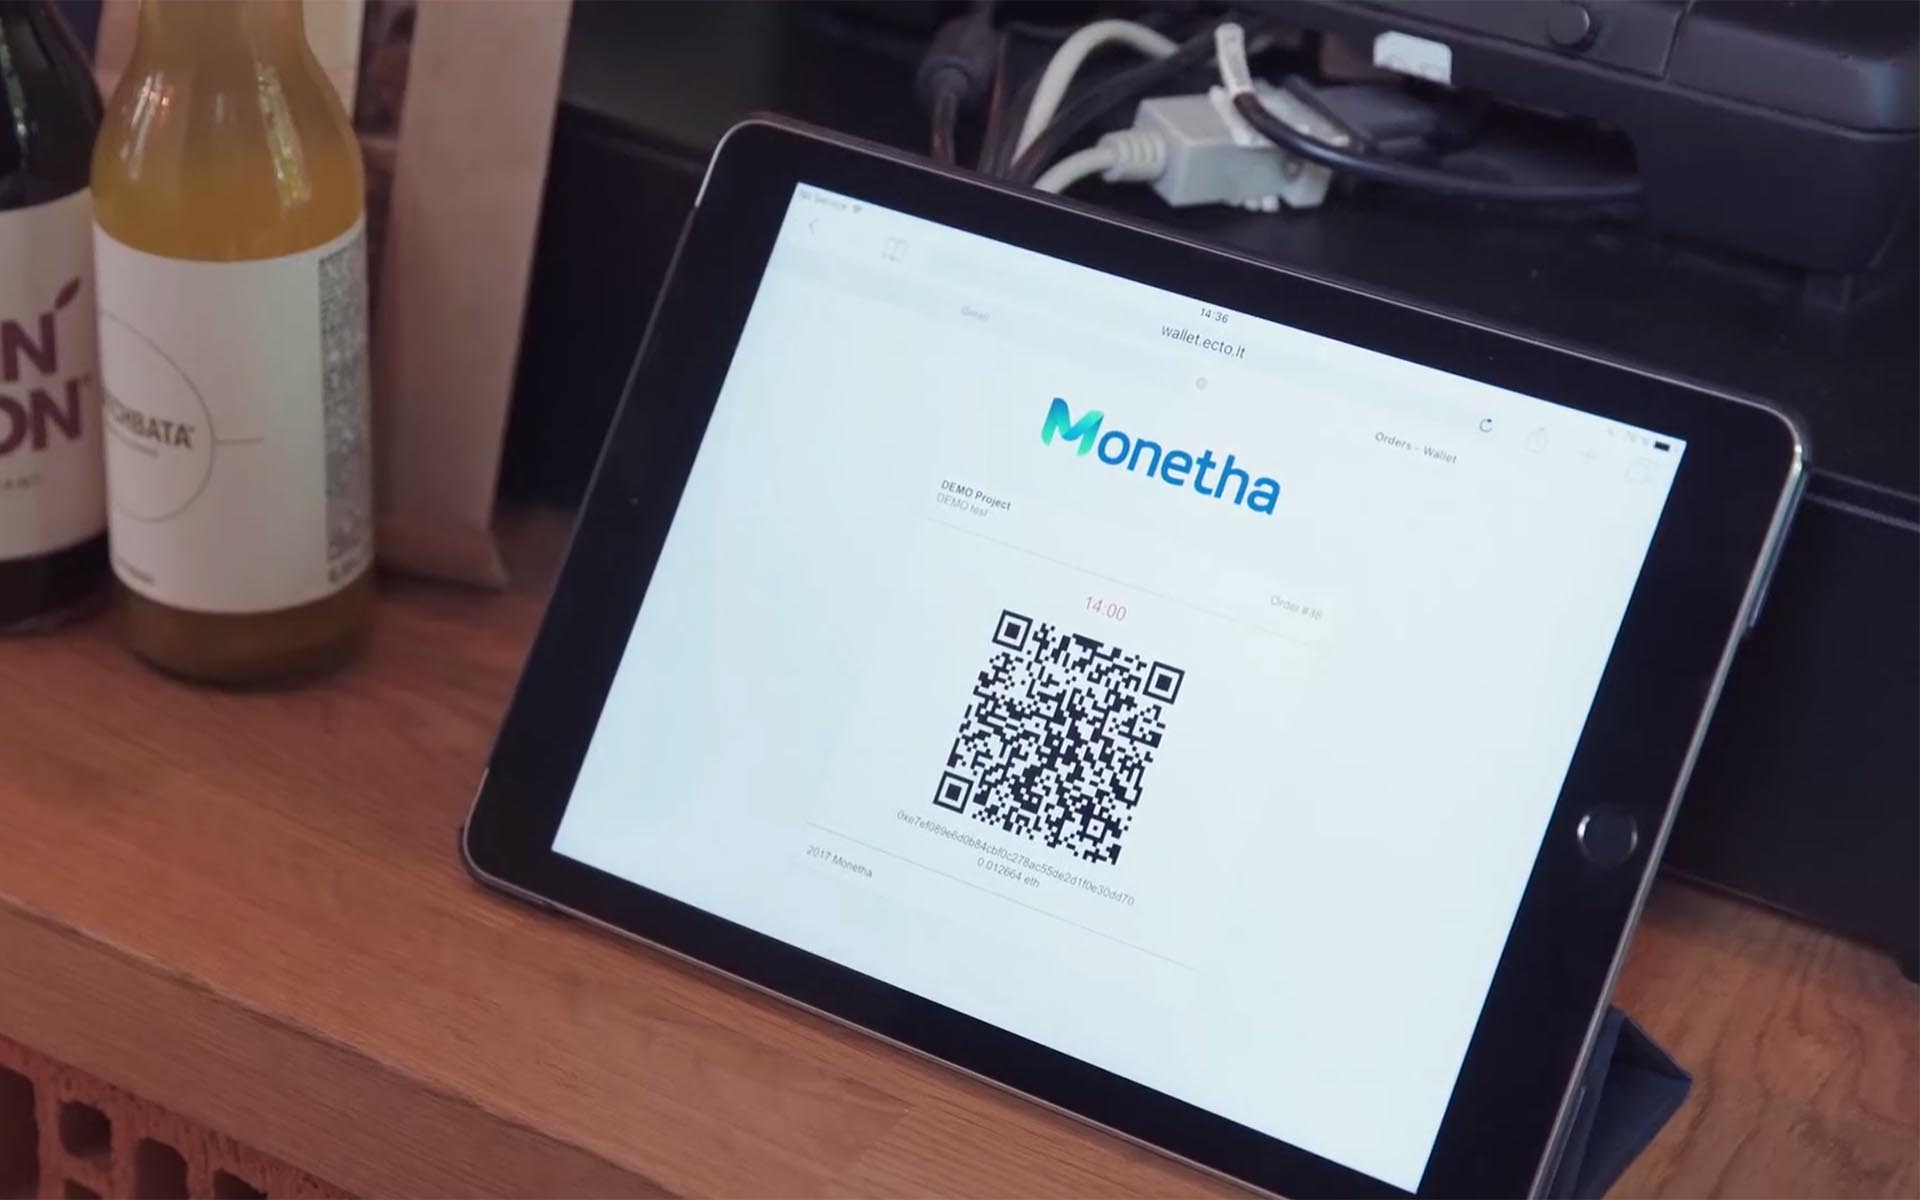 Former PayPal Exec and Leading Online Reputation Expert Join Monetha As ICO Date Approaches